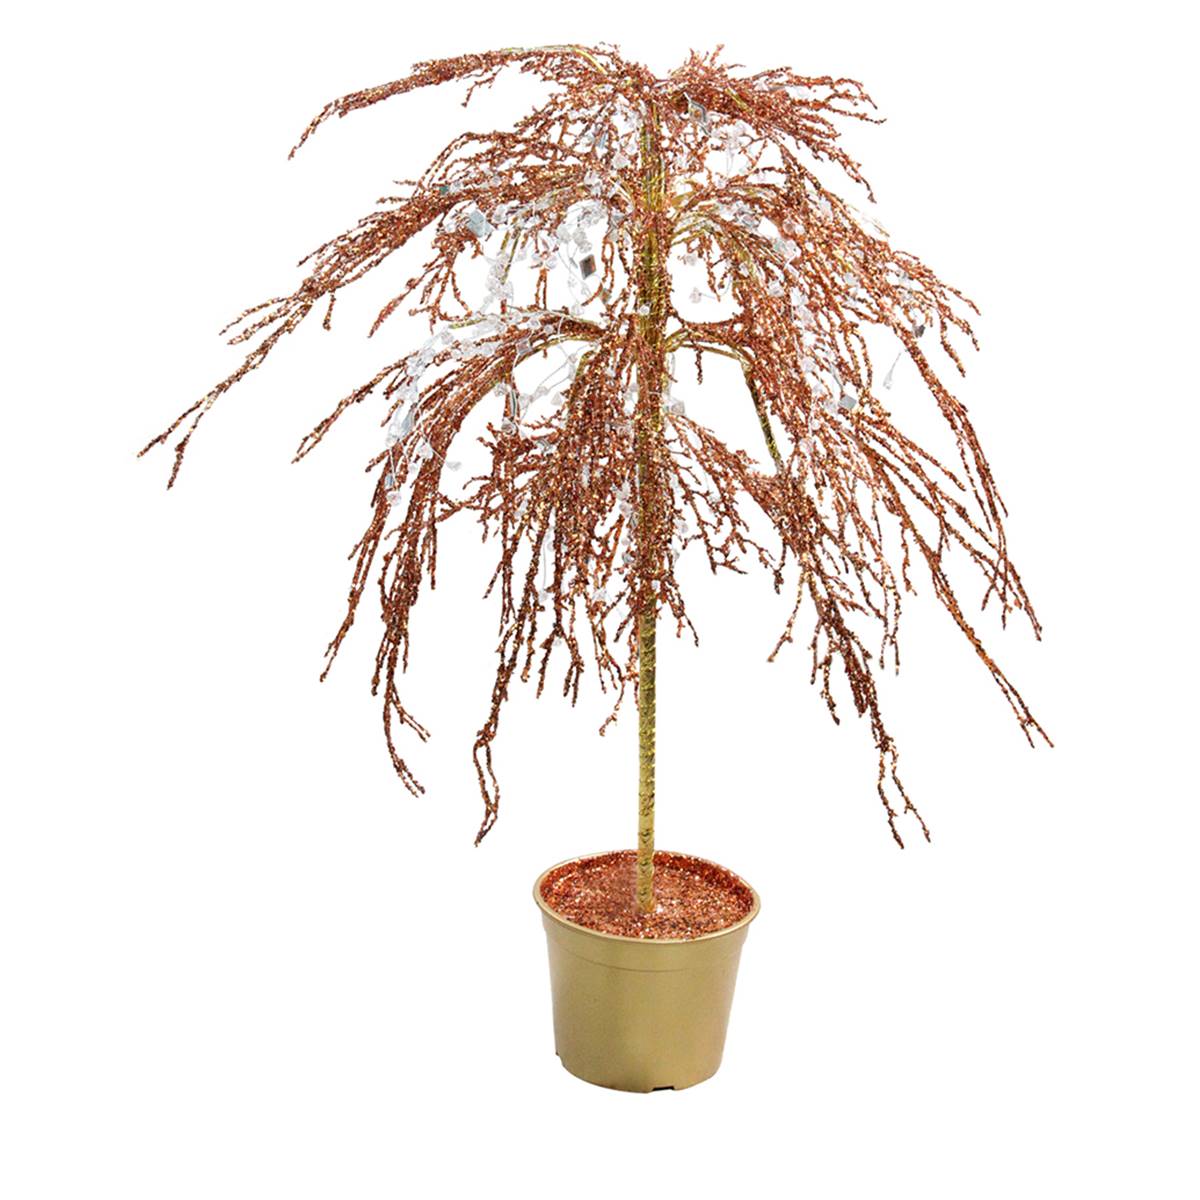 Northlight 46in. Copper Crystallized Glitter Potted Holiday Tree